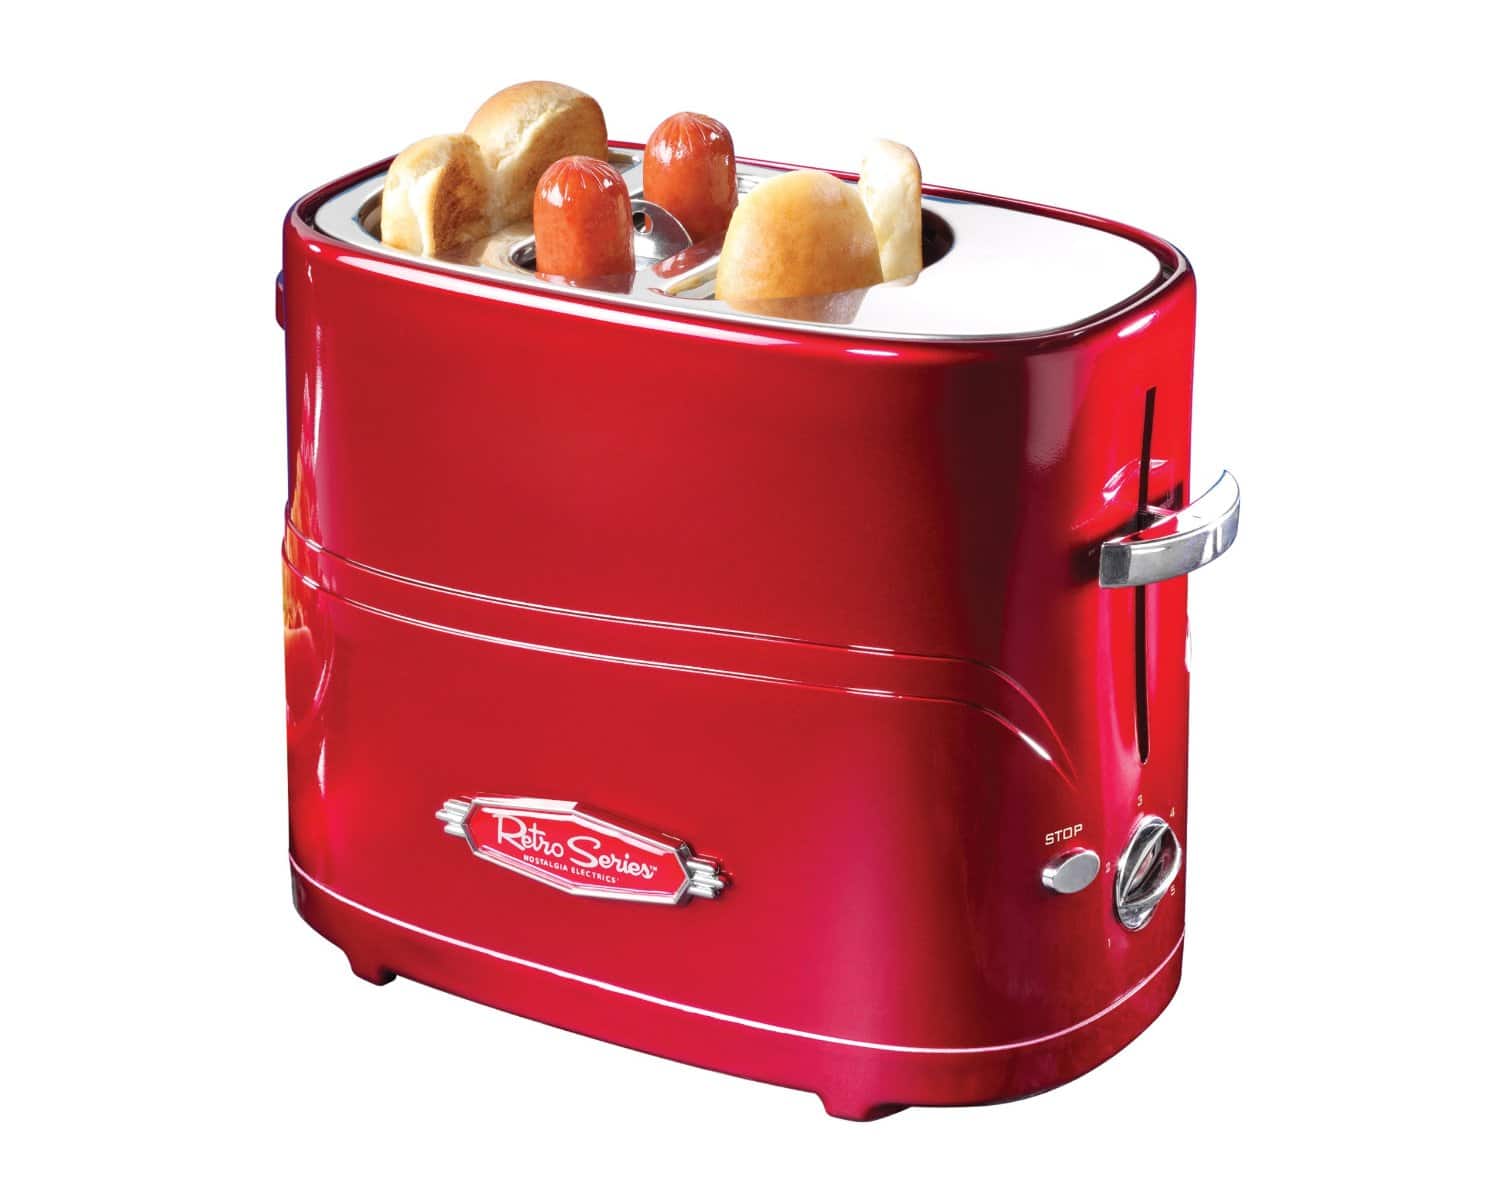 Vintage Toaster For Hot Dogs Brings The Retro Into Eating